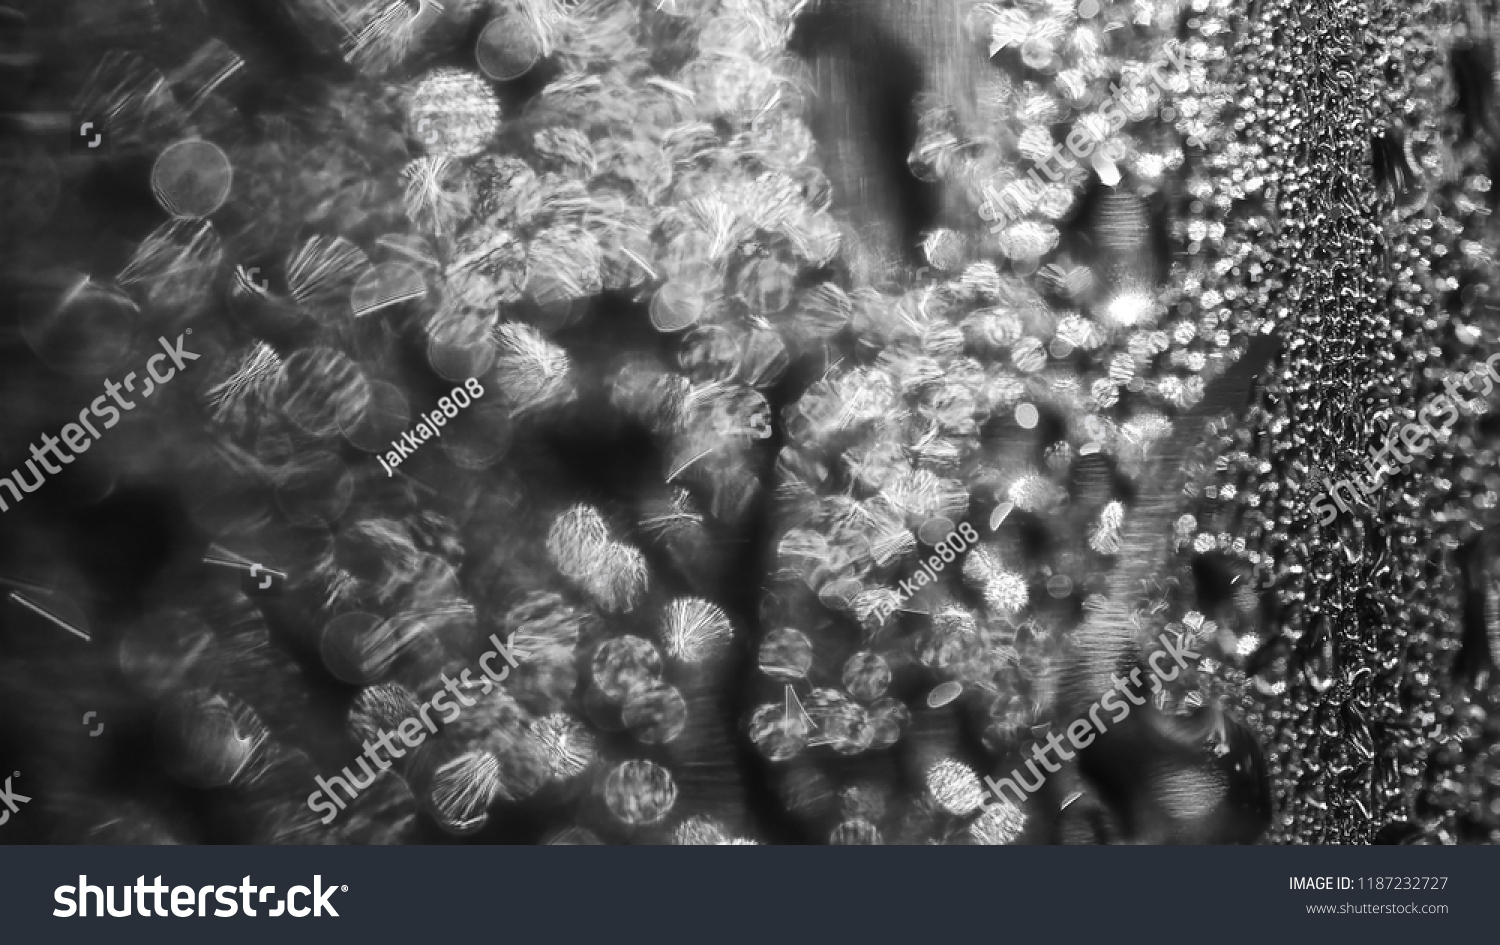 Blurred image, water drops bubbles and reflection on glass, abstract for background #1187232727